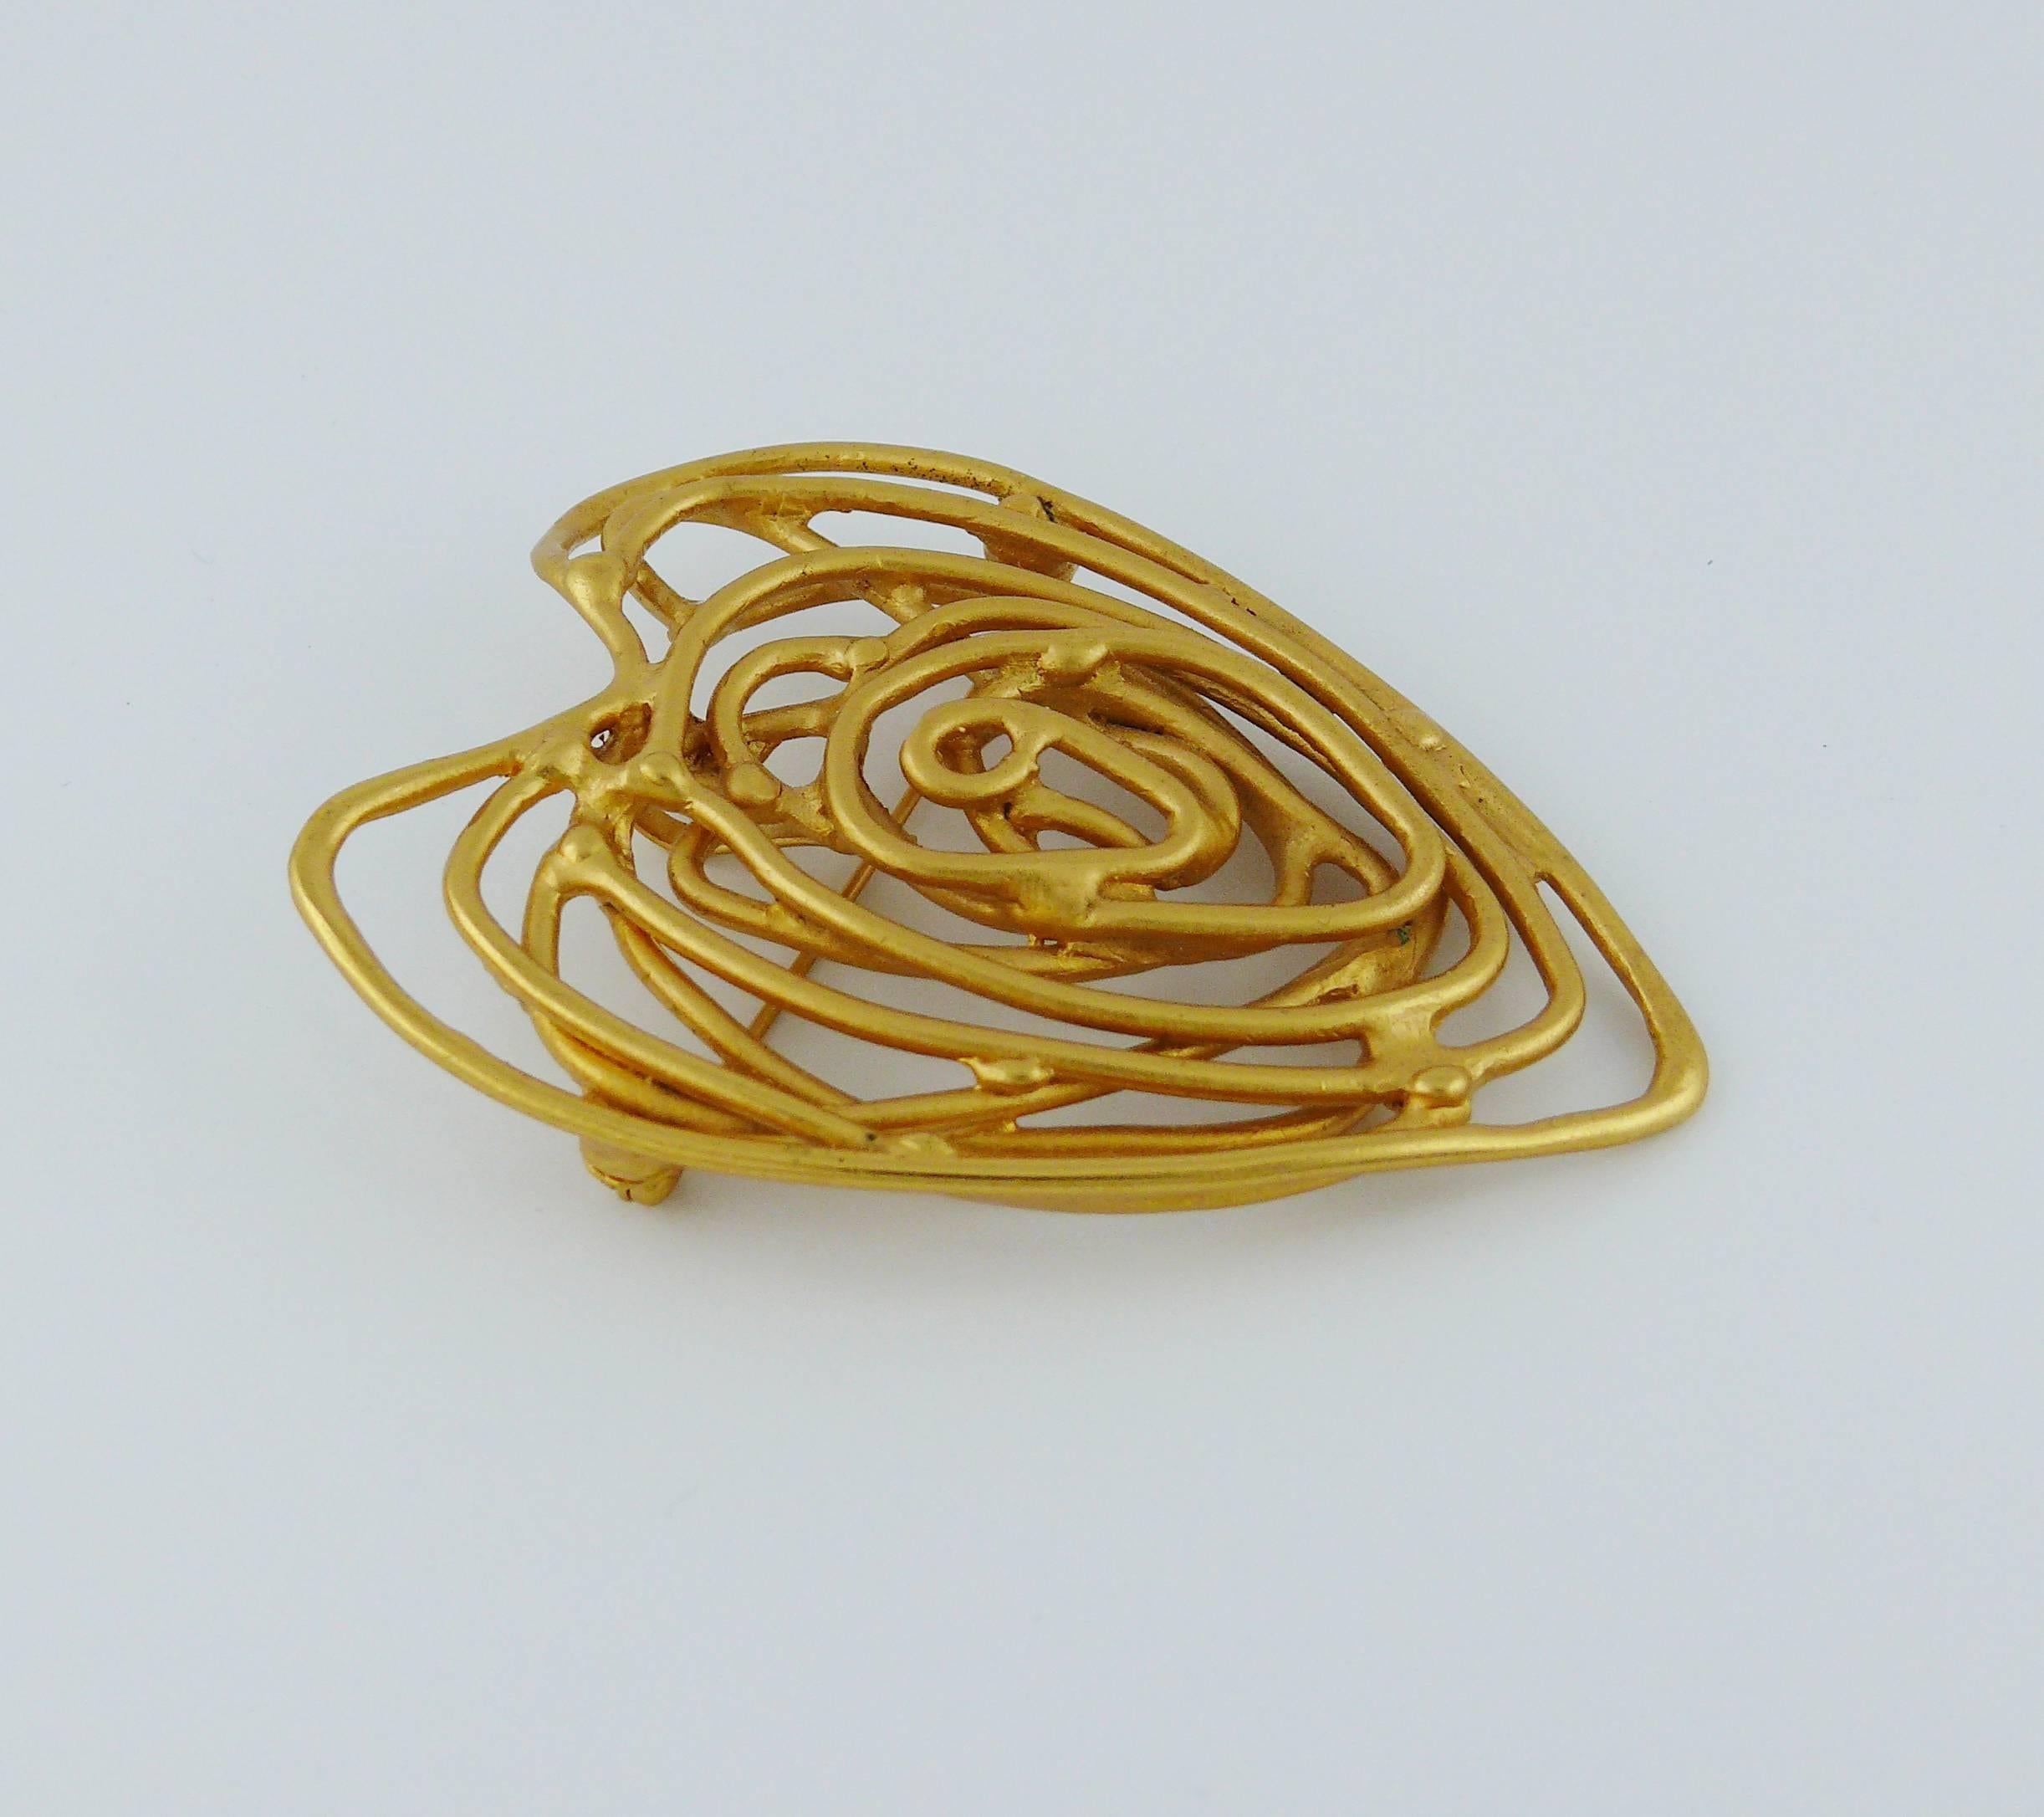 BALENCIAGA vintage matte gold tone wired heart brooch/pendant.

Marked BALENCIAGA Paris Made in France.
Numbered P7.

Indicative measurements : length approx. 7 cm (2.76 inches) / width approx. 5.2 cm (2.05 inches).

Comes with original